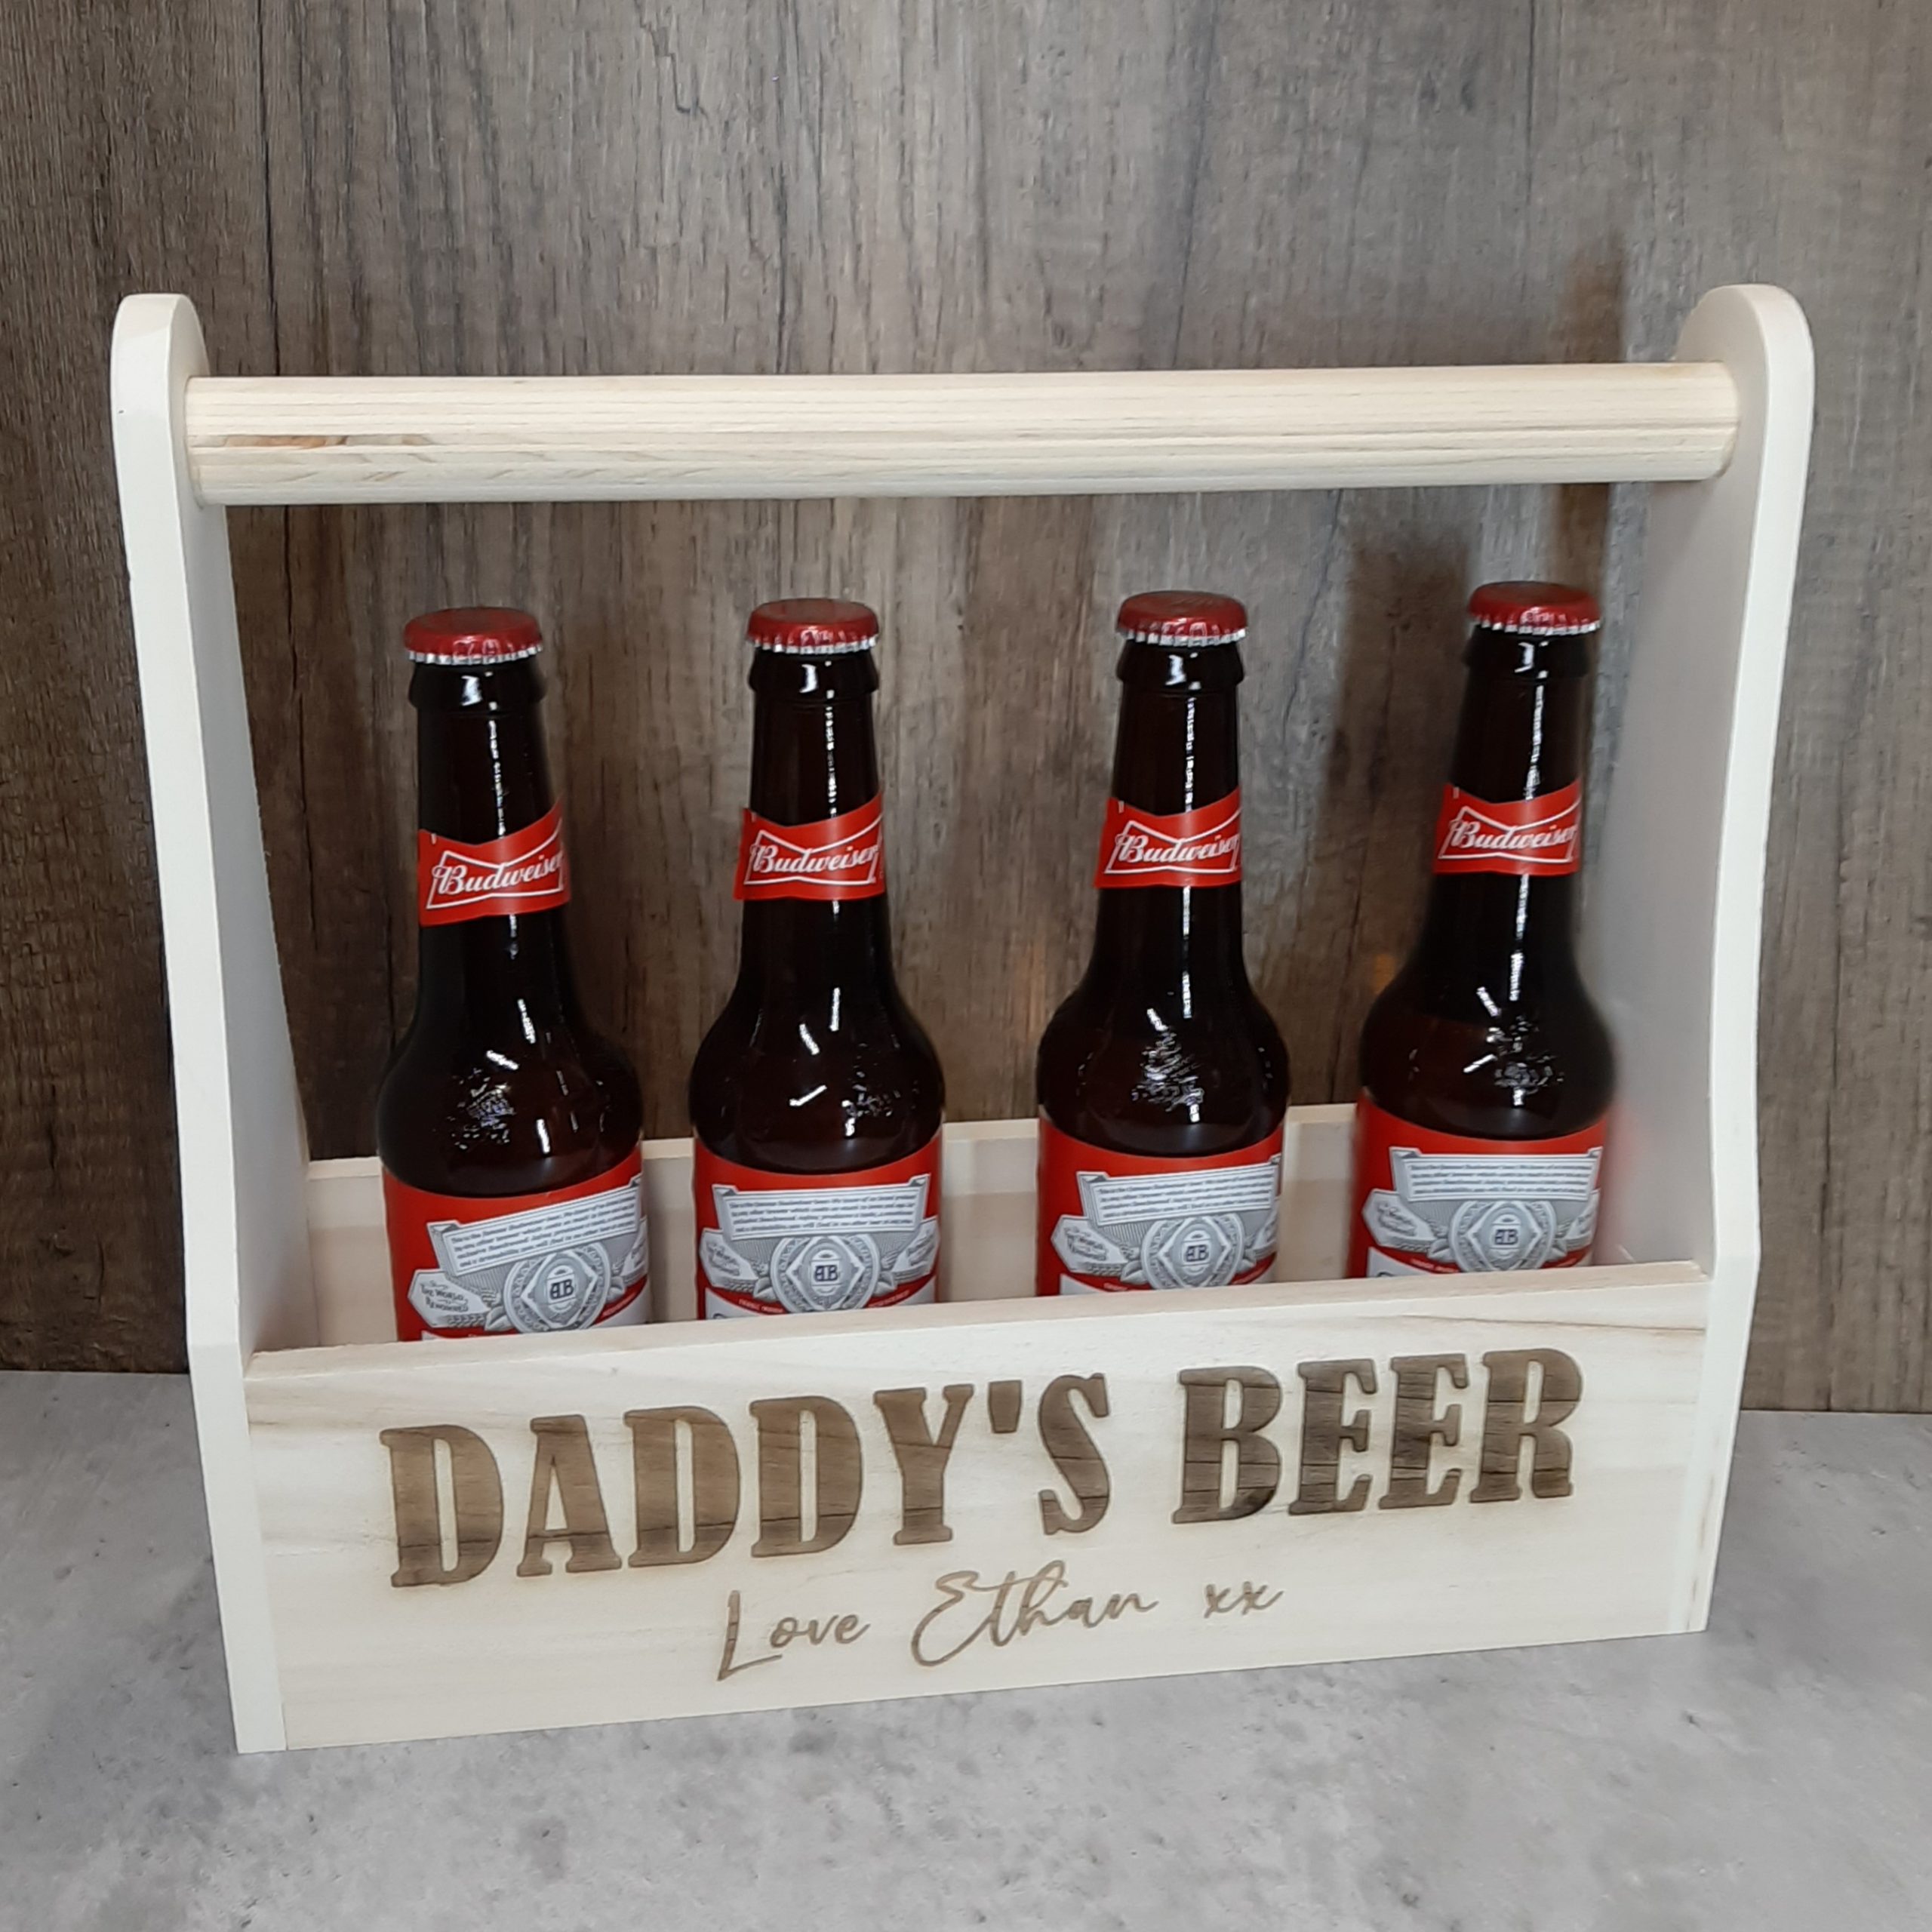 wooden-personalised-beer-carrier-bottle-caddy-with-4-drink-bottles-scaled